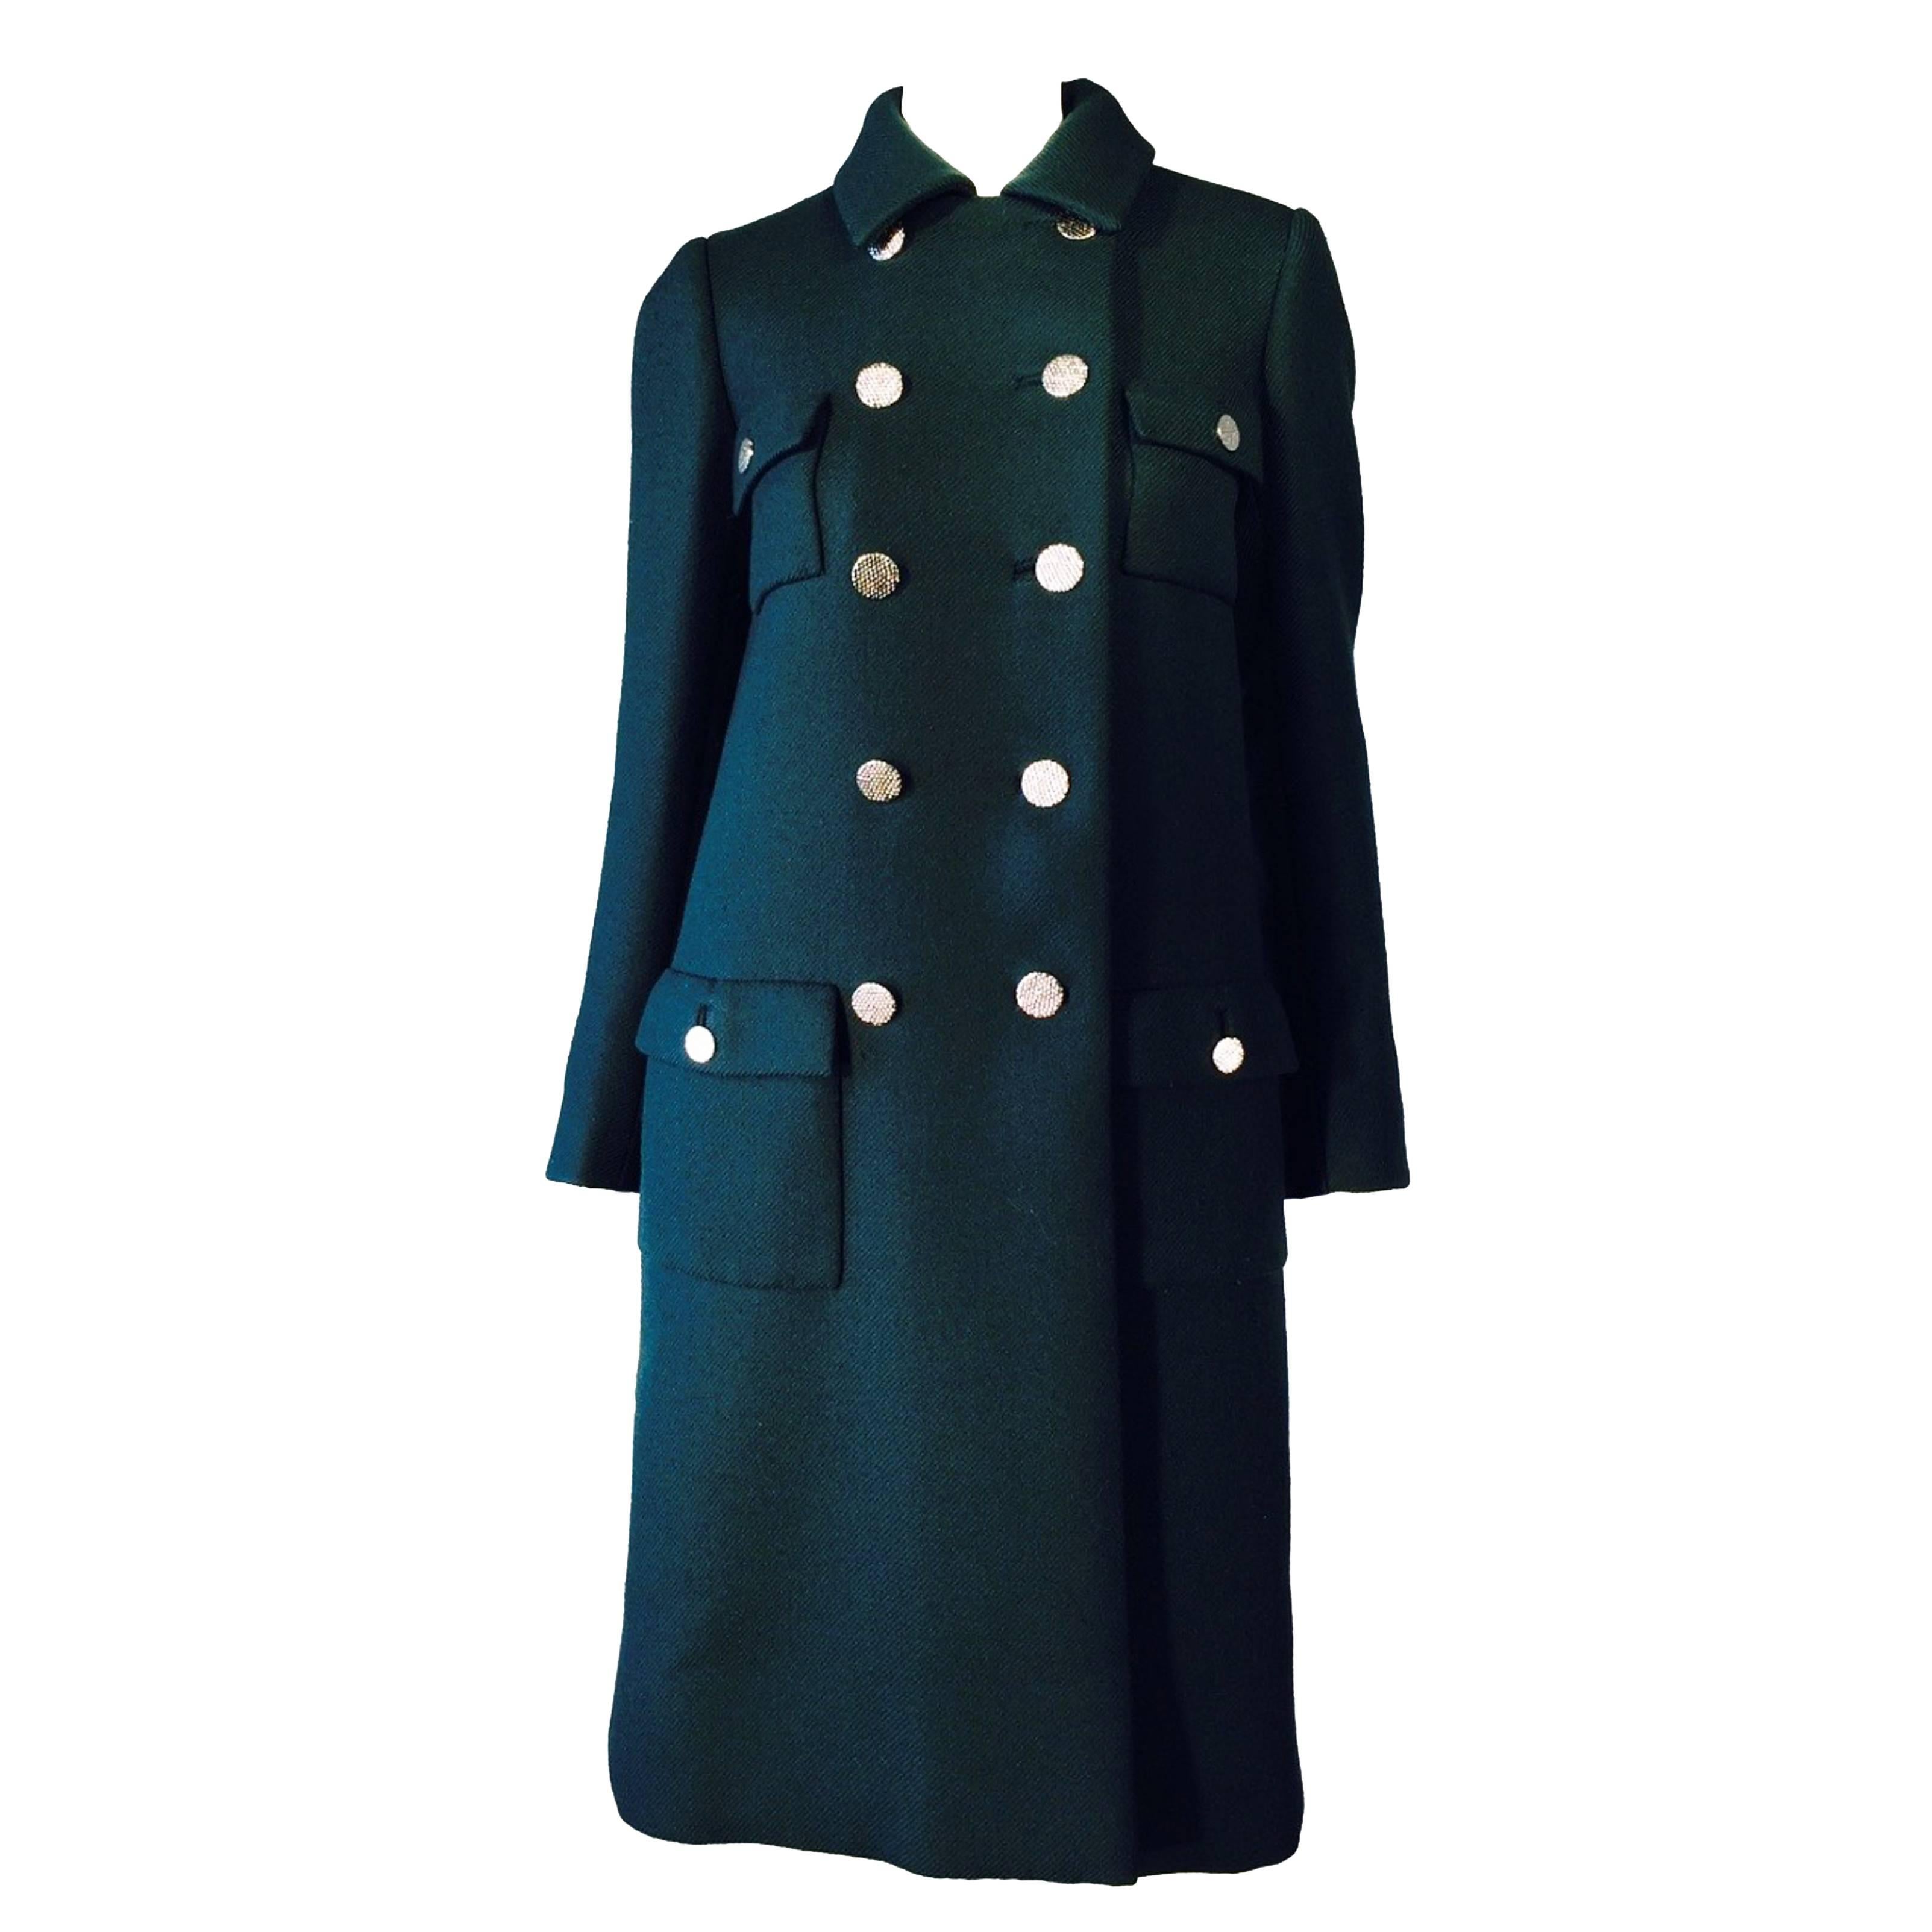 Norman Norell Military Coat, 1960s For Sale